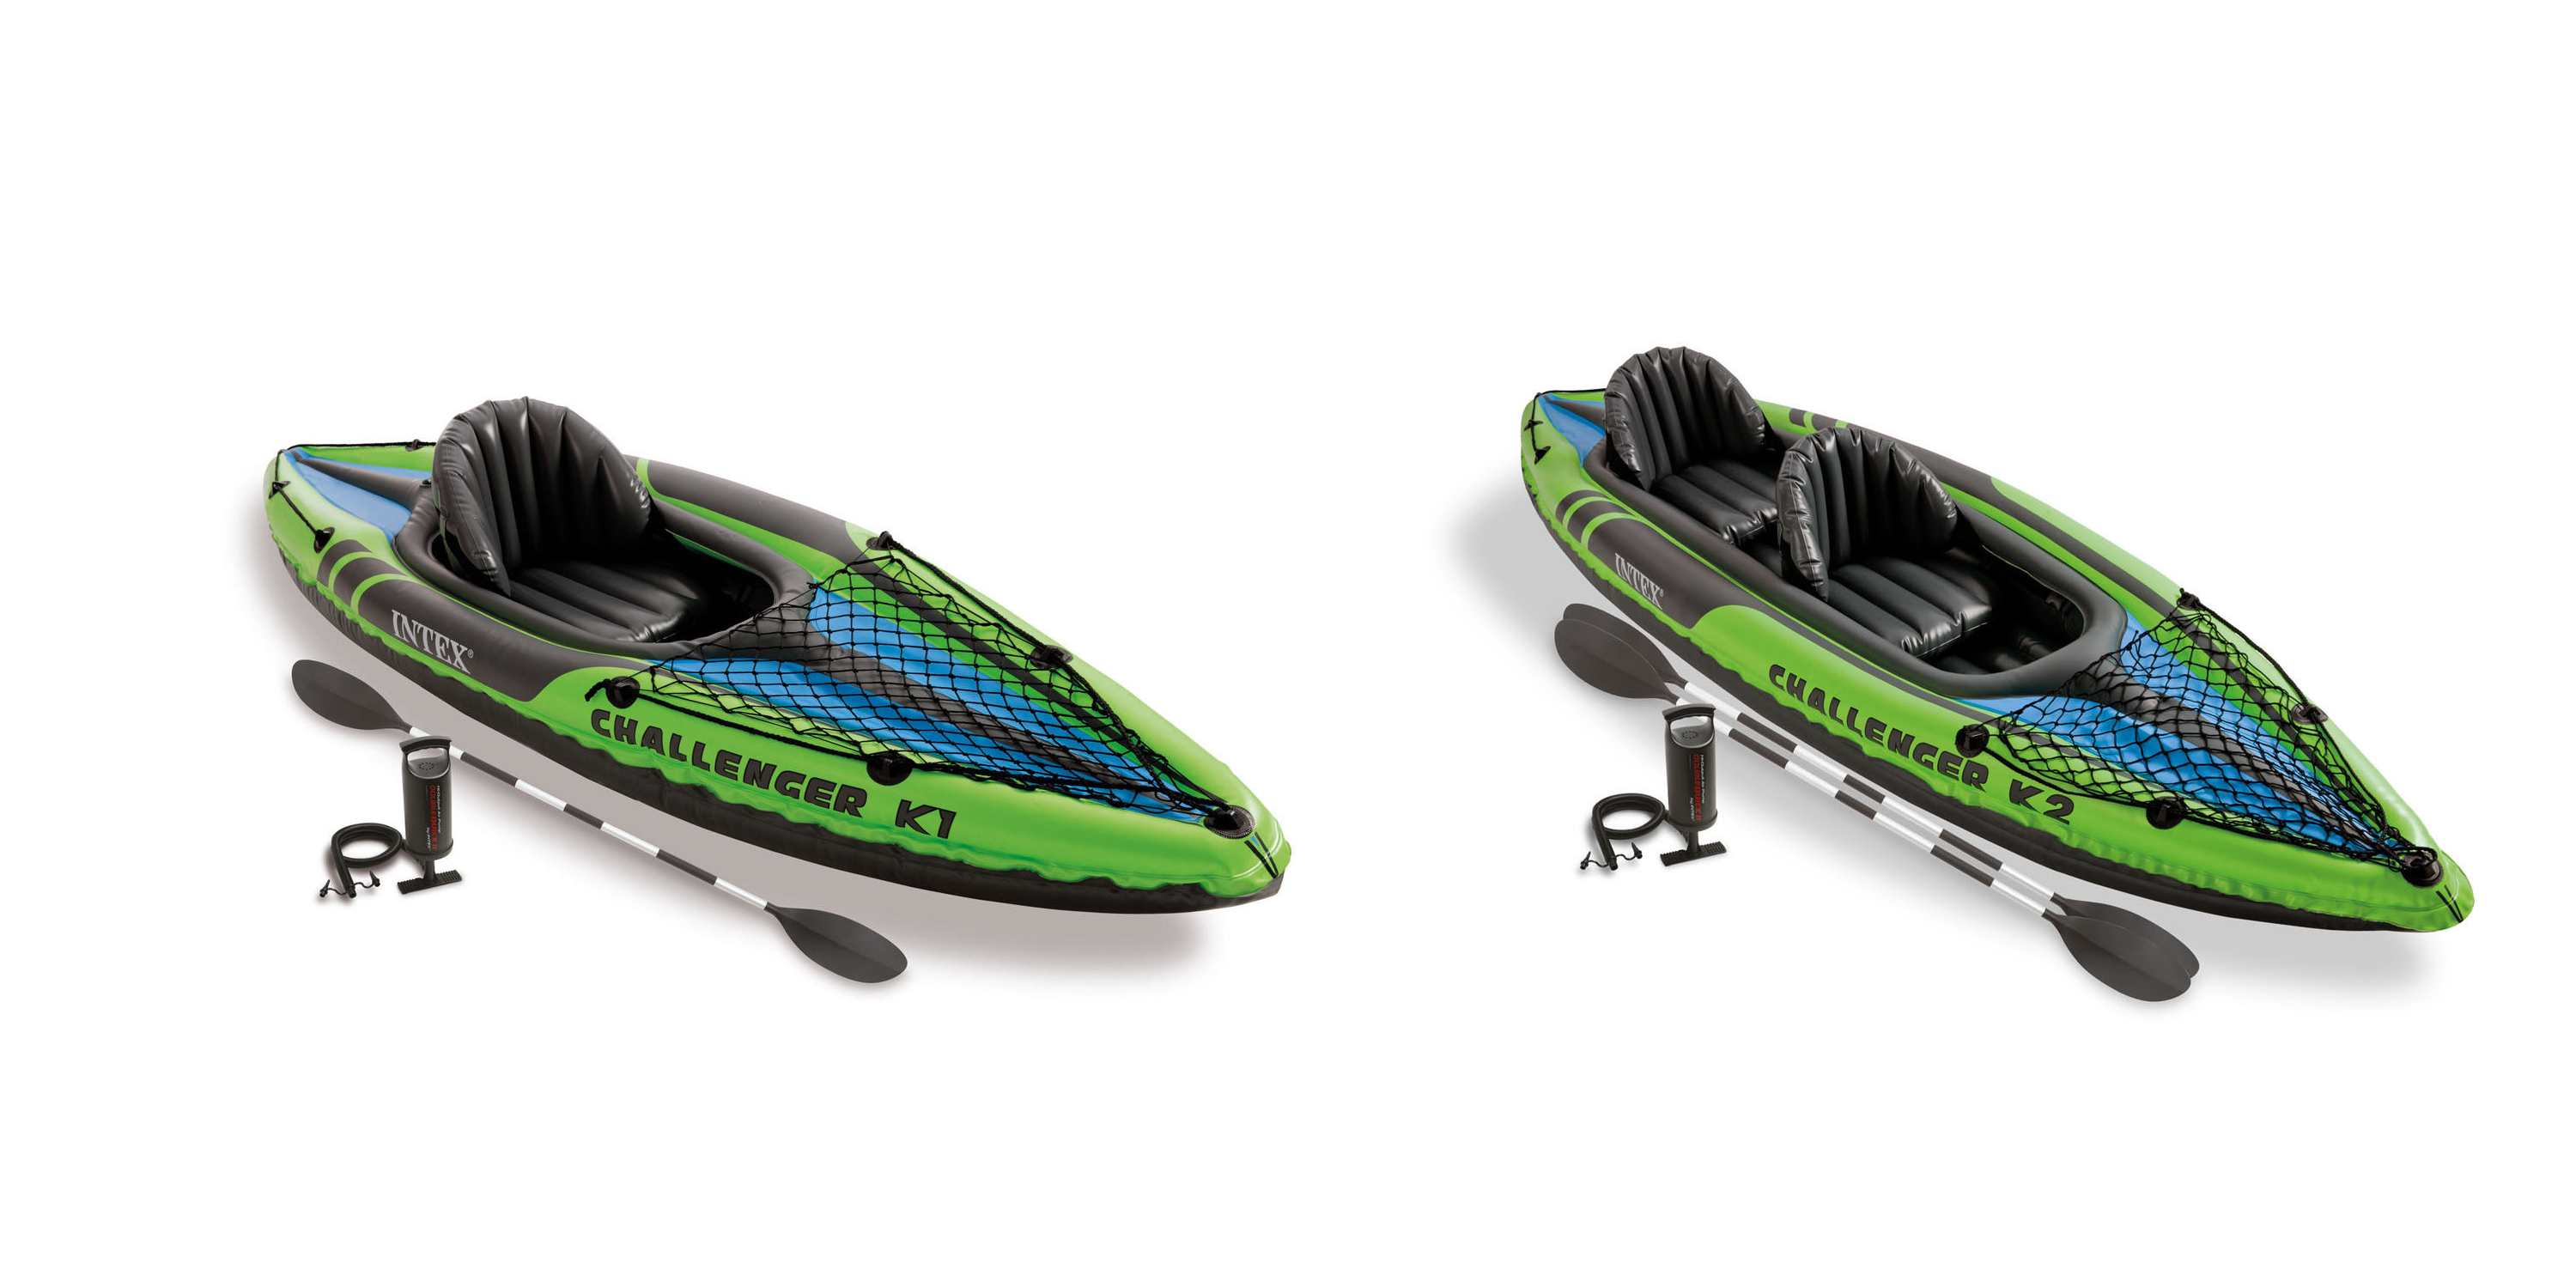 Intex Challenger Inflatable Kayaks for 1 or 2 People From $59.99!